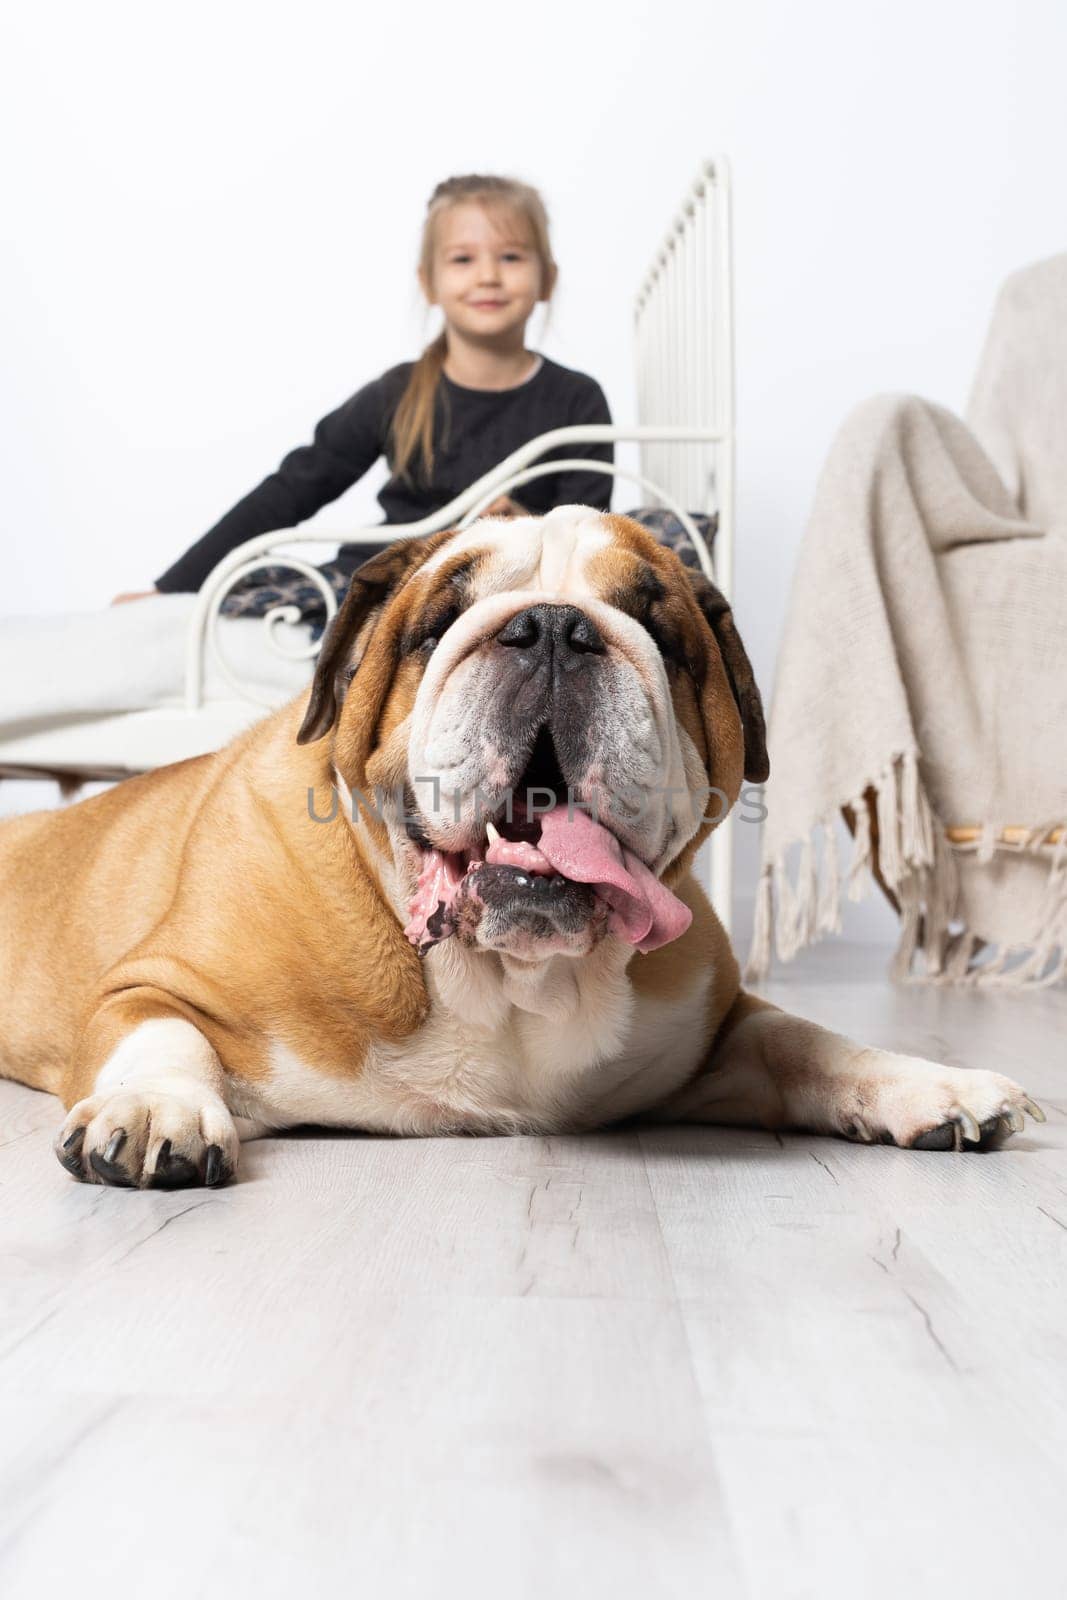 A girl is sitting on the bed and an english bulldog on the floor. There is also a dog in the child's room.